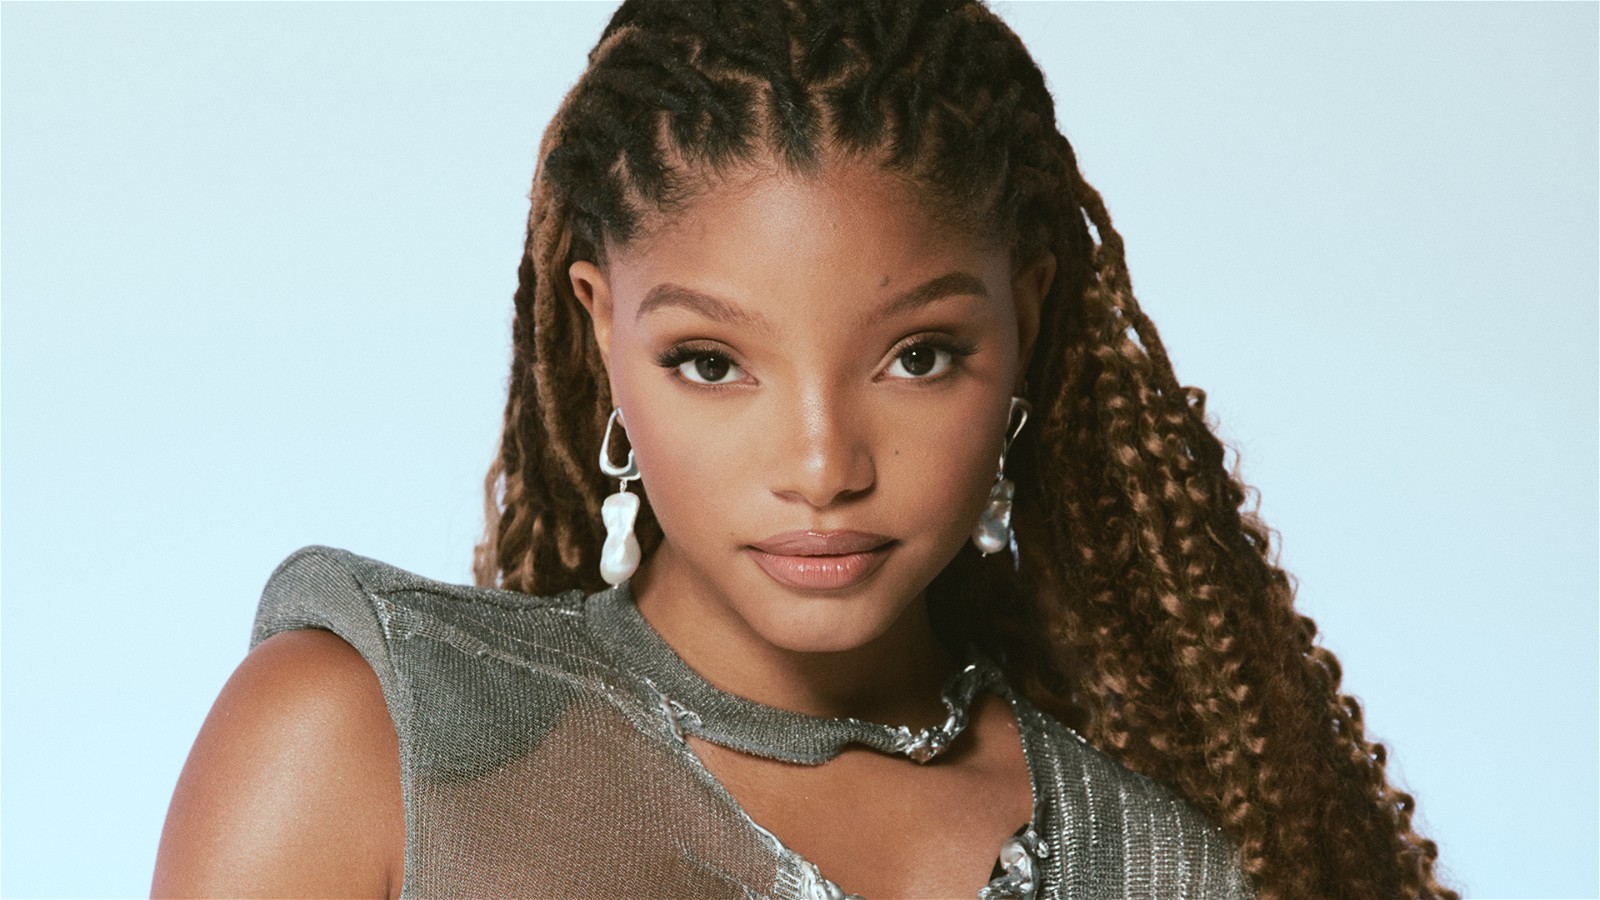 Halle Bailey, American singer and actress